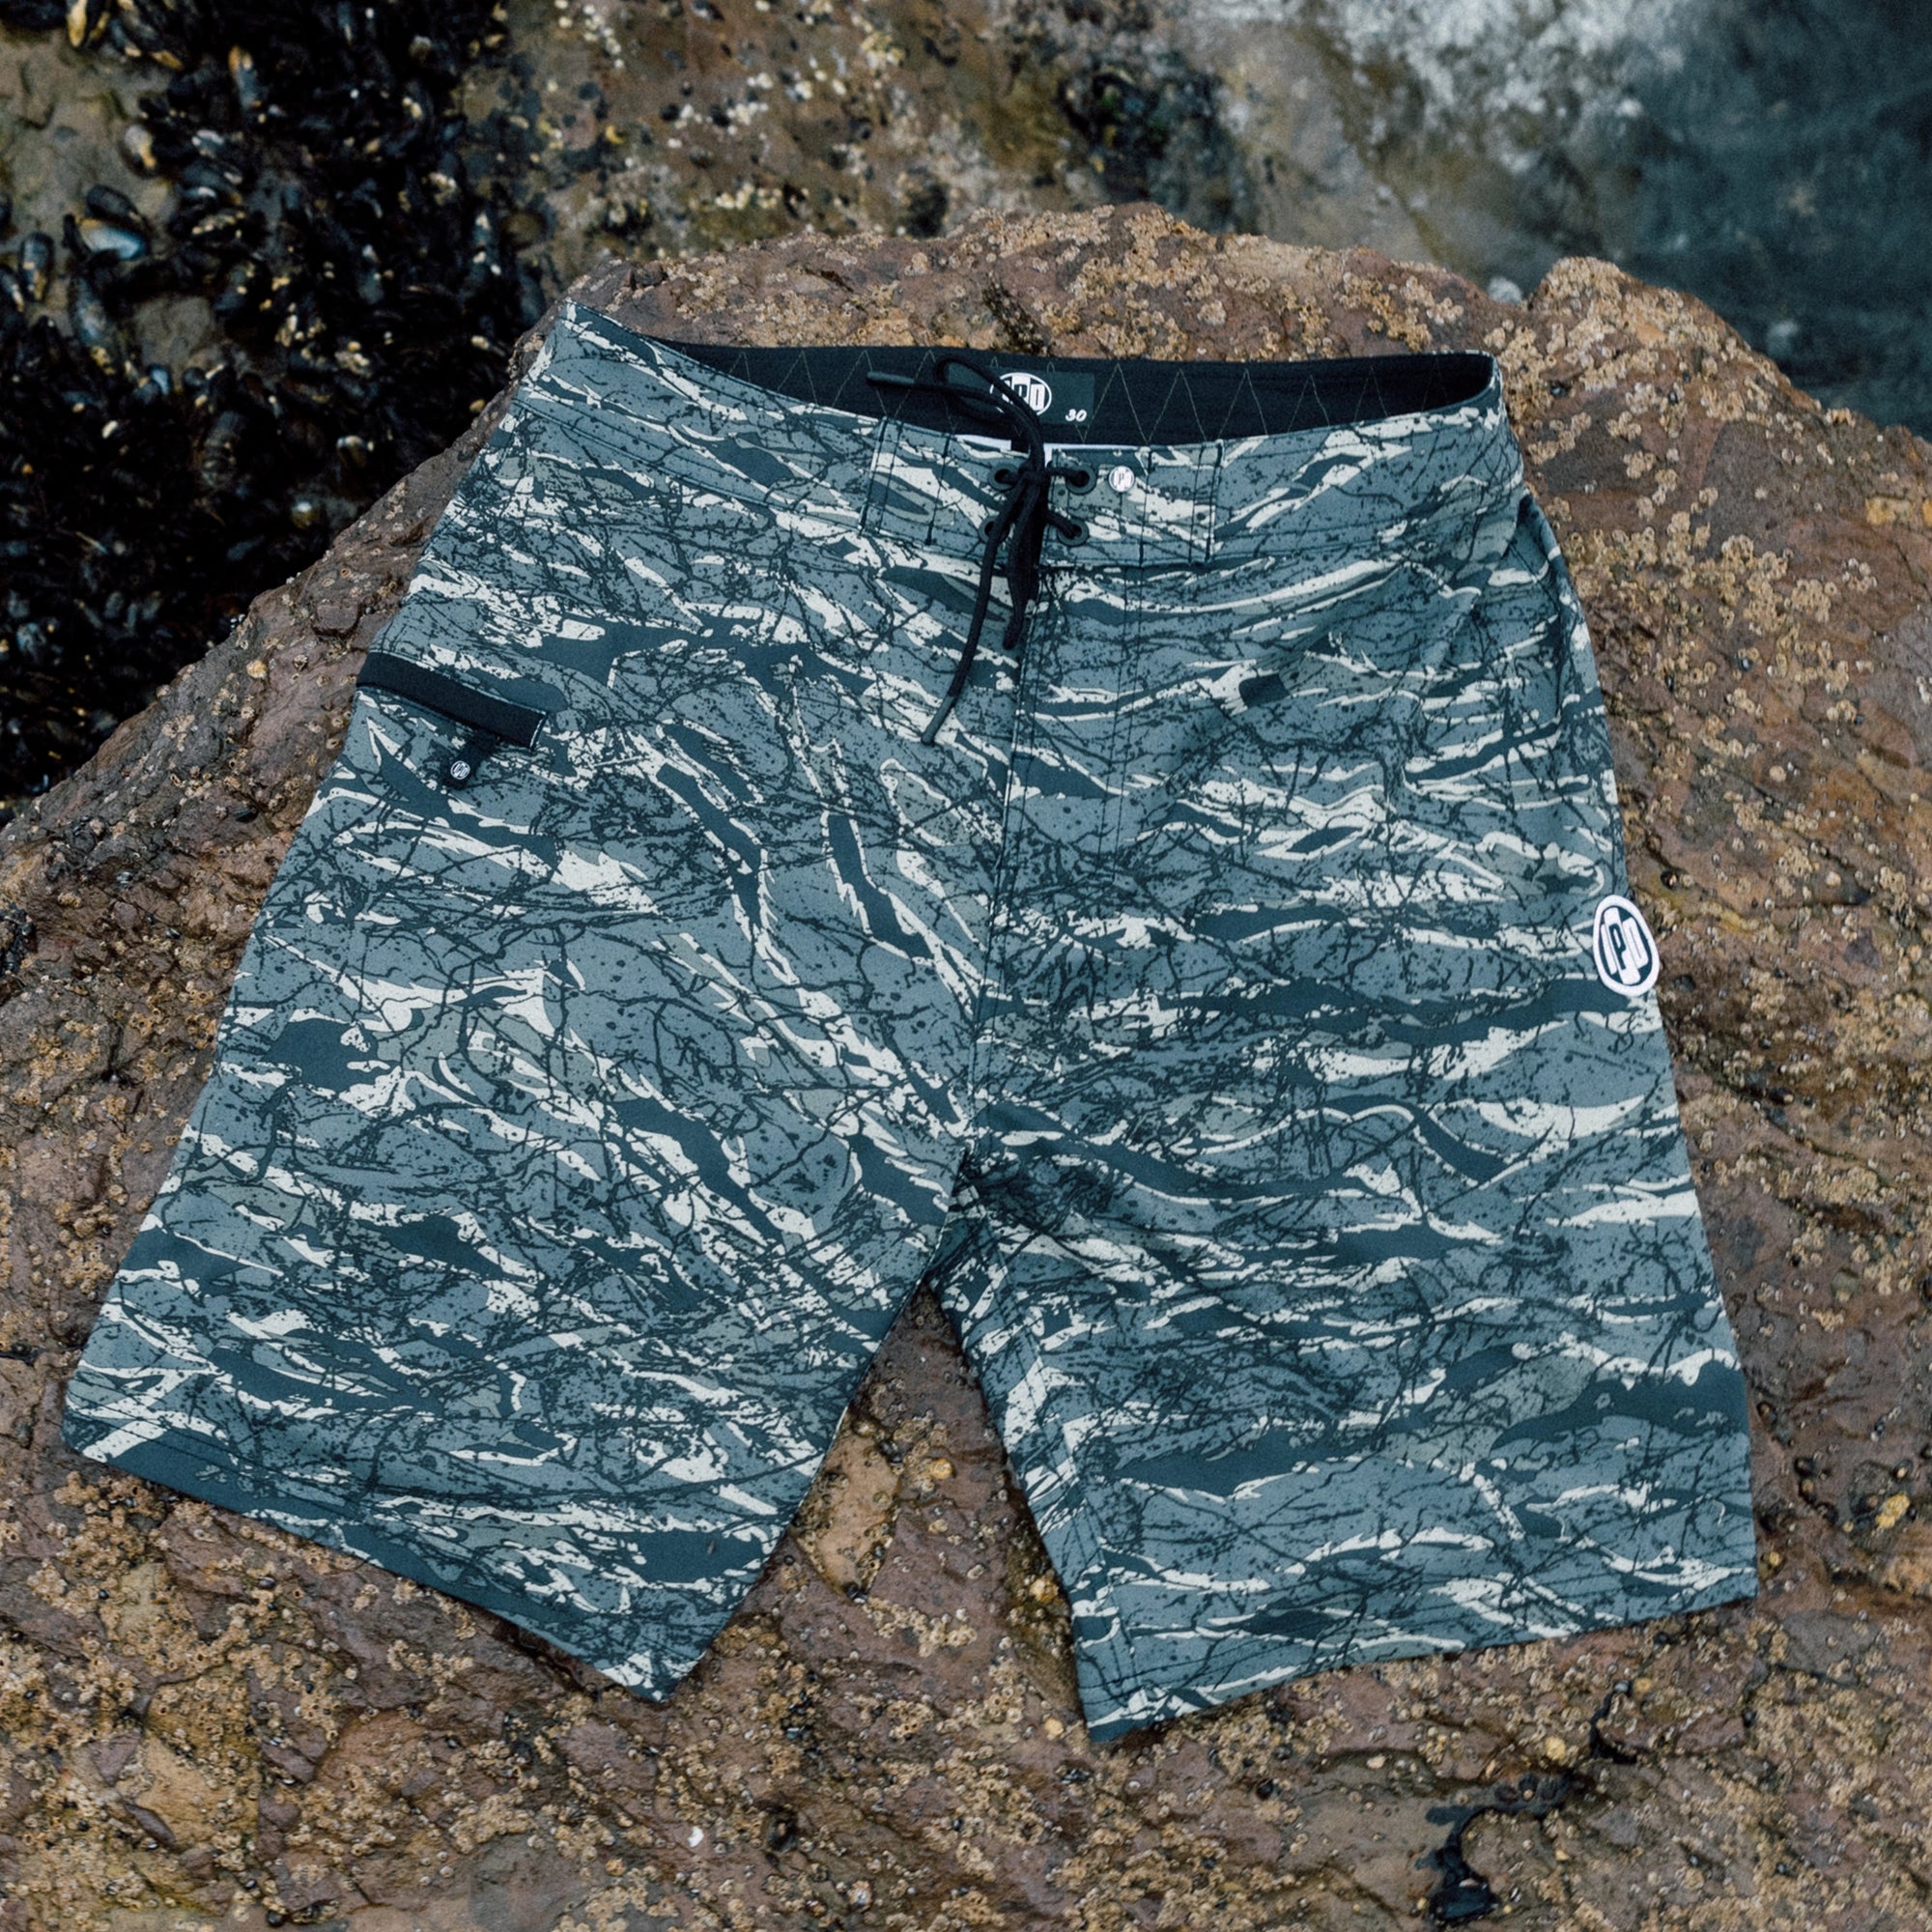 Camouflage board shorts laid out on rocks by the ocean. Made from 86% recycled polyester and 14% spandex. Features a 20-inch straight hem outseam and stretch mesh pocket bag.